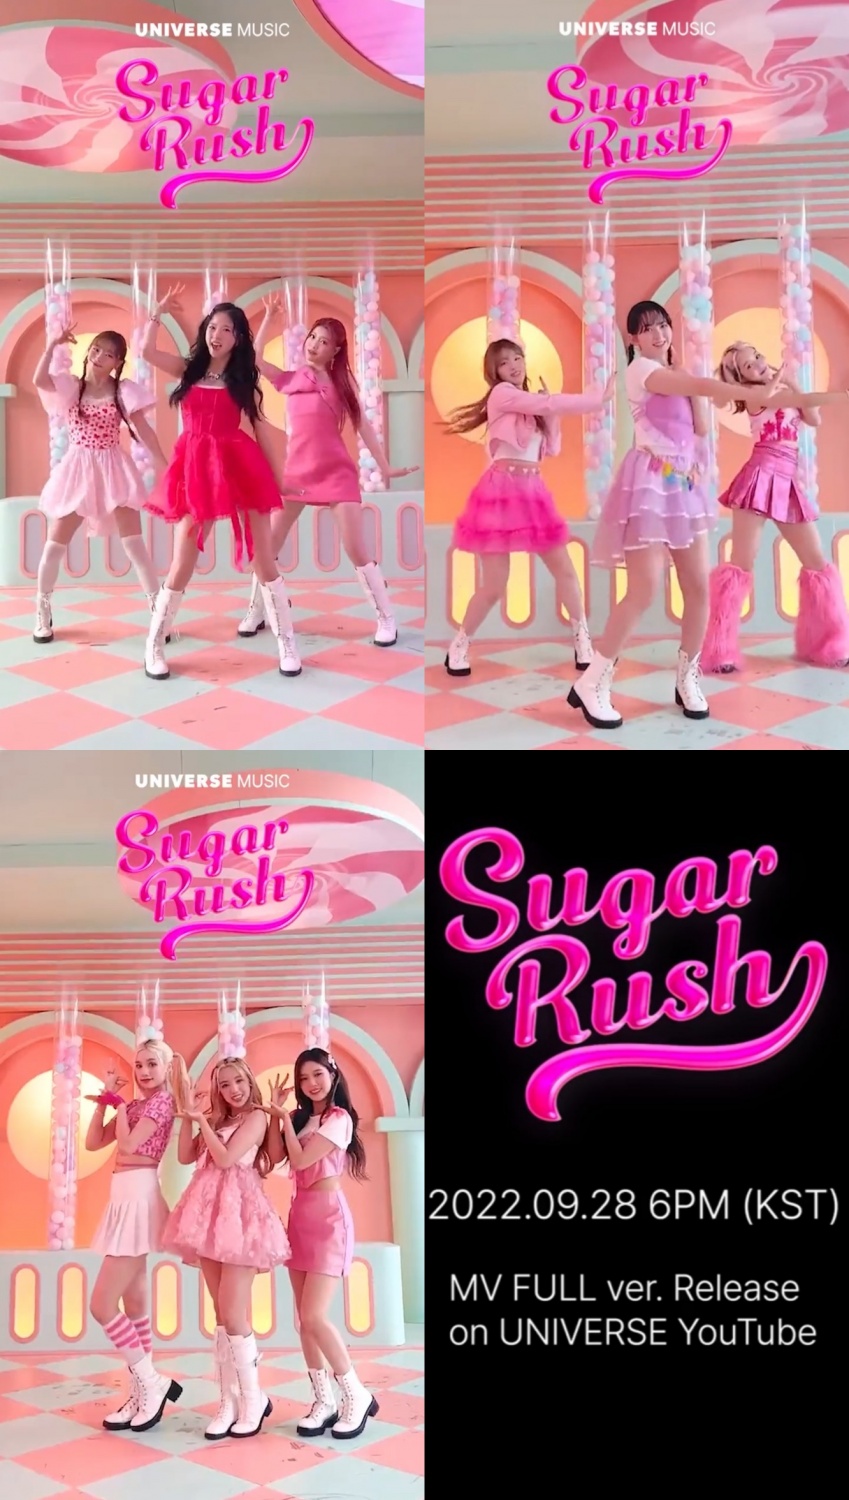 Universe X Kep1er Releases New ‘Sugar Rush’ Challenge Video!